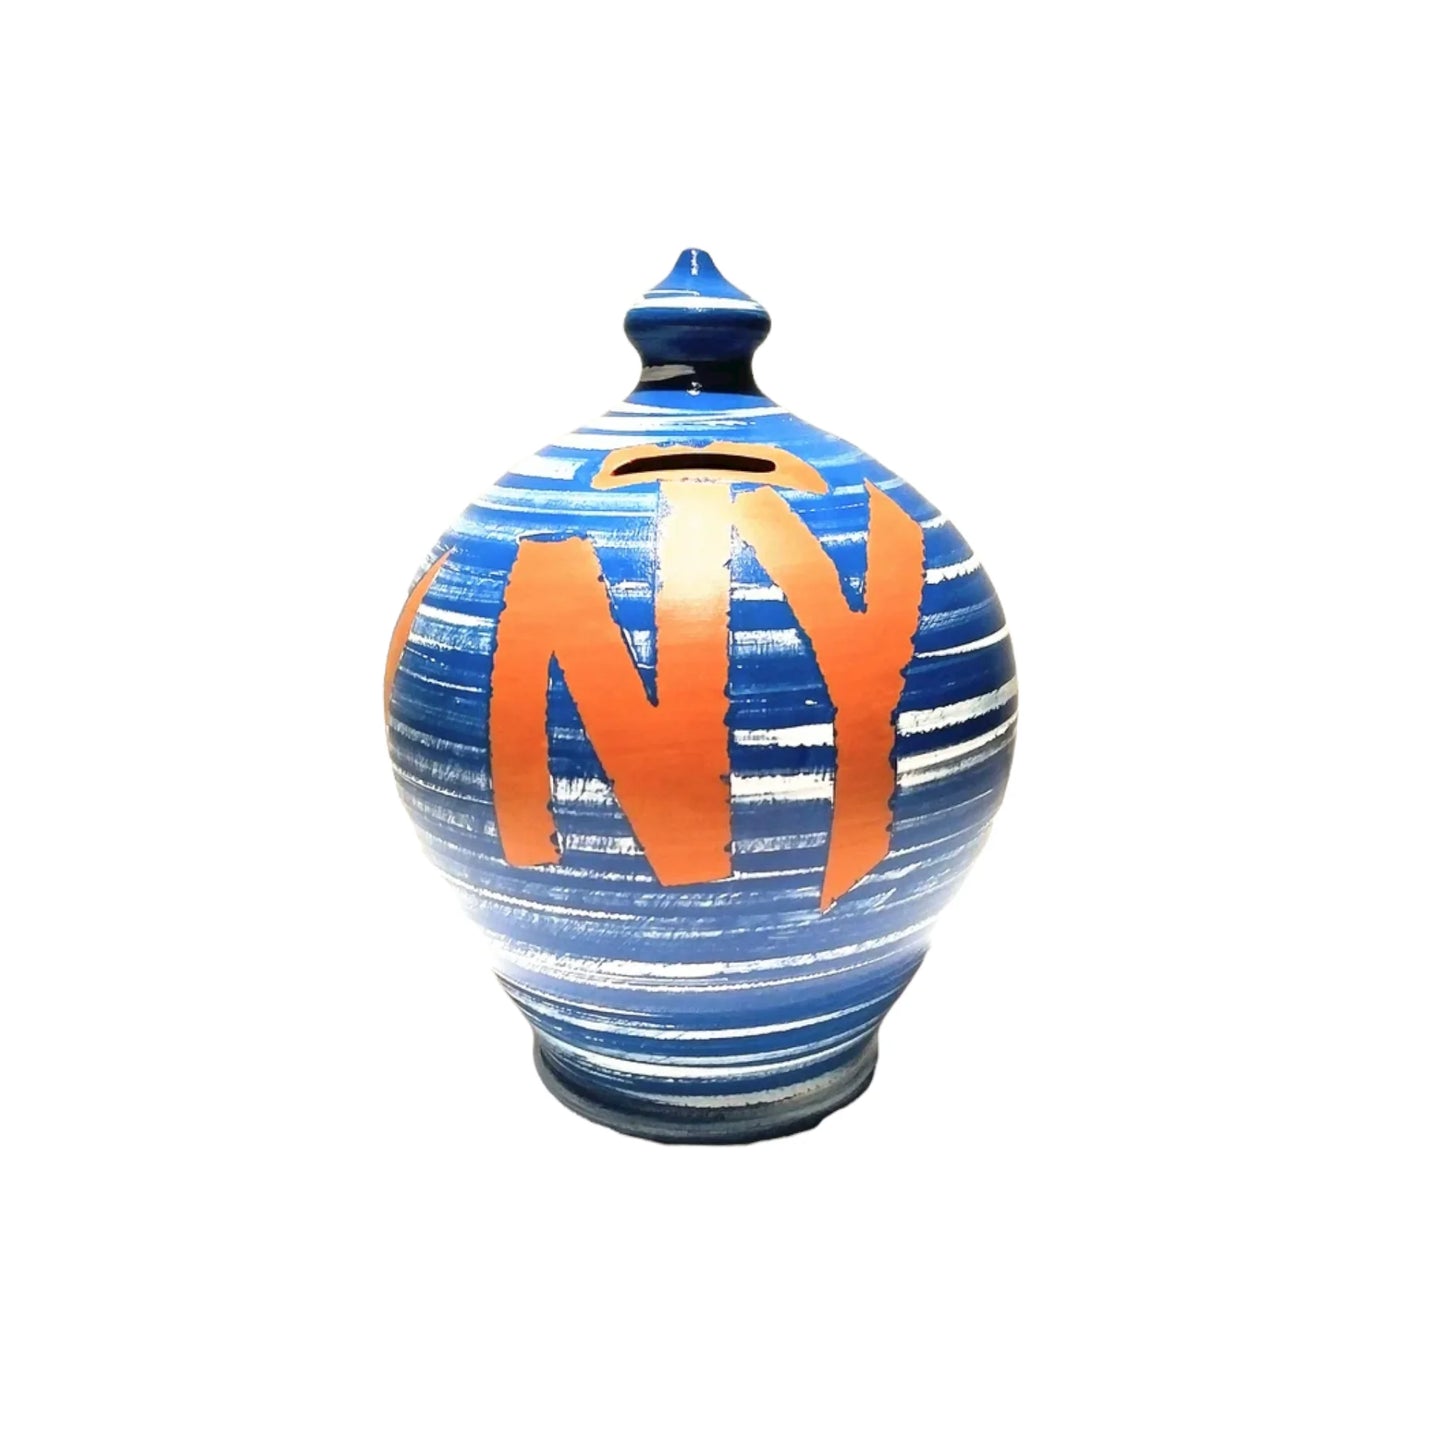 Travel Fund Piggy Bank. A great gift idea for both women and men!  💰Size: 20 cm = 7.87 inches in height / Circumference: 52 cm = 20 inch.  Colors: White, Cobalt Blue and terracotta, as in picture.  With hole and stopper plug, or without hole.